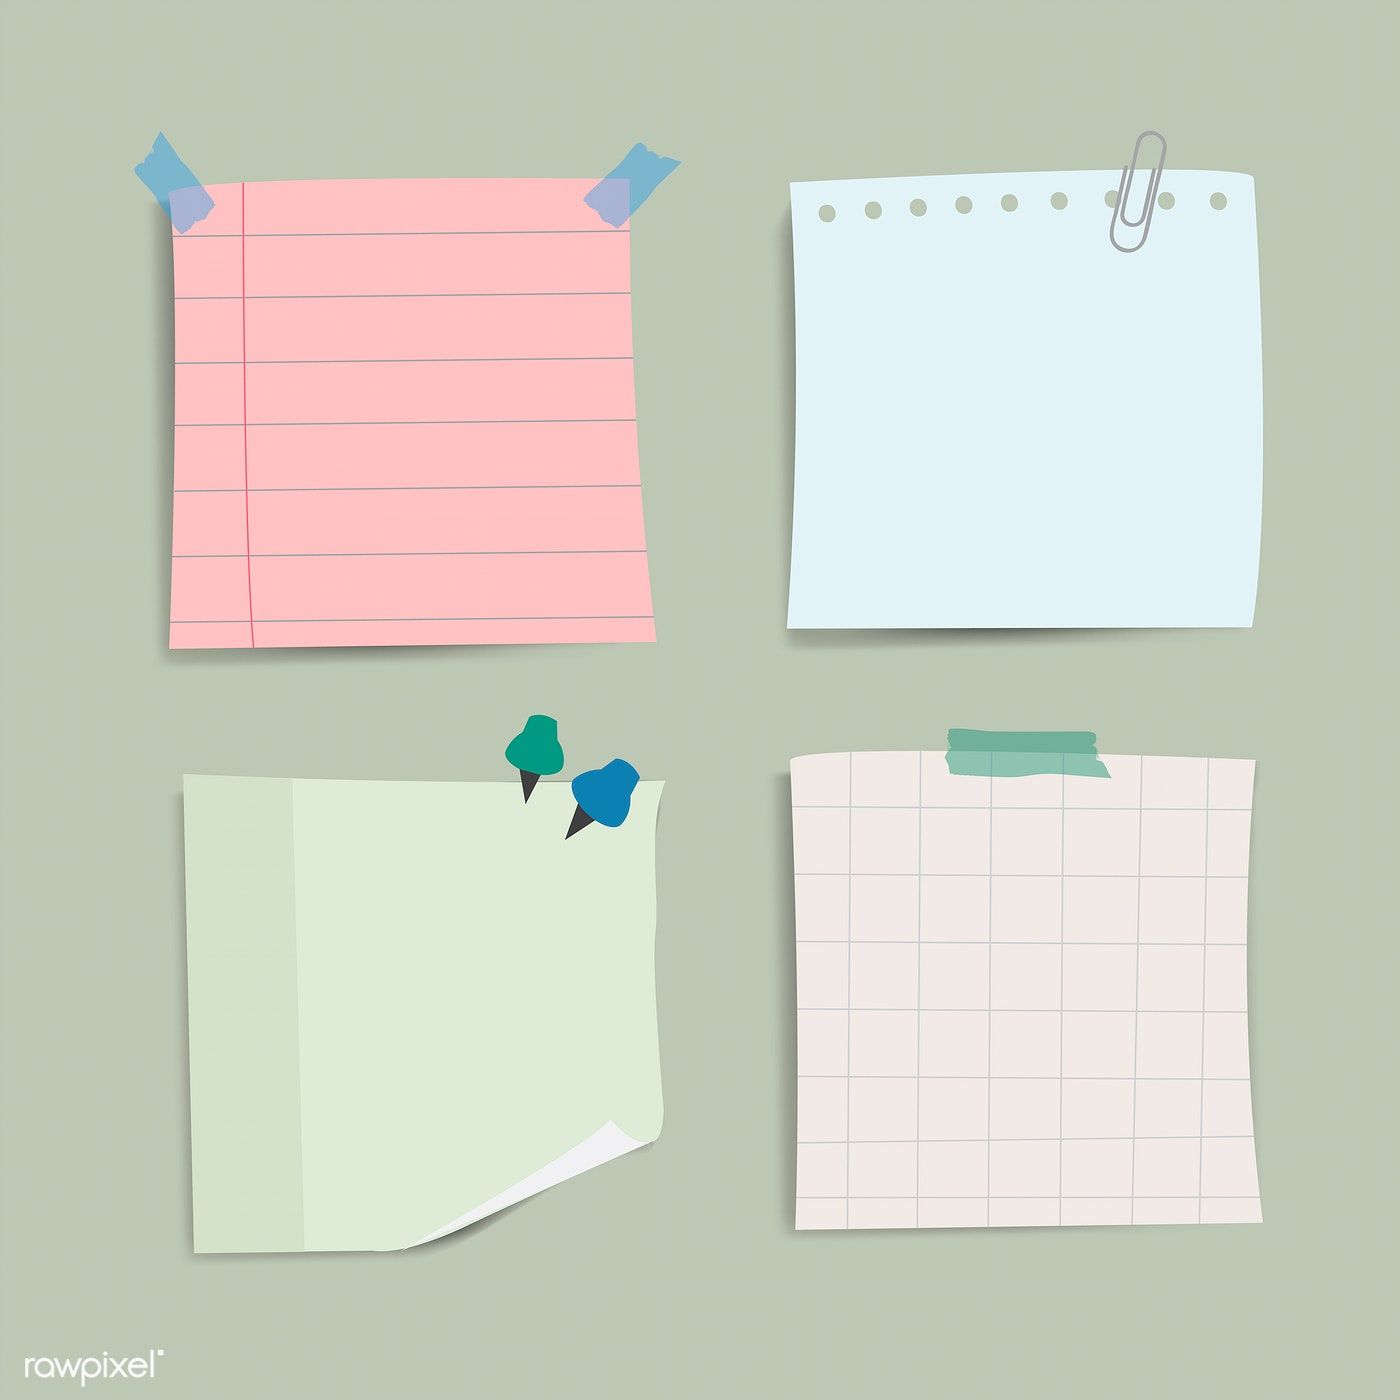 Download premium vector of Colorful reminder paper notes vector set by Chayanit about paper clip, sticky notepaper clip, free memos, pushpin, and Colorful adhes. Note paper, iPad pro wallpaper, Sticky notes